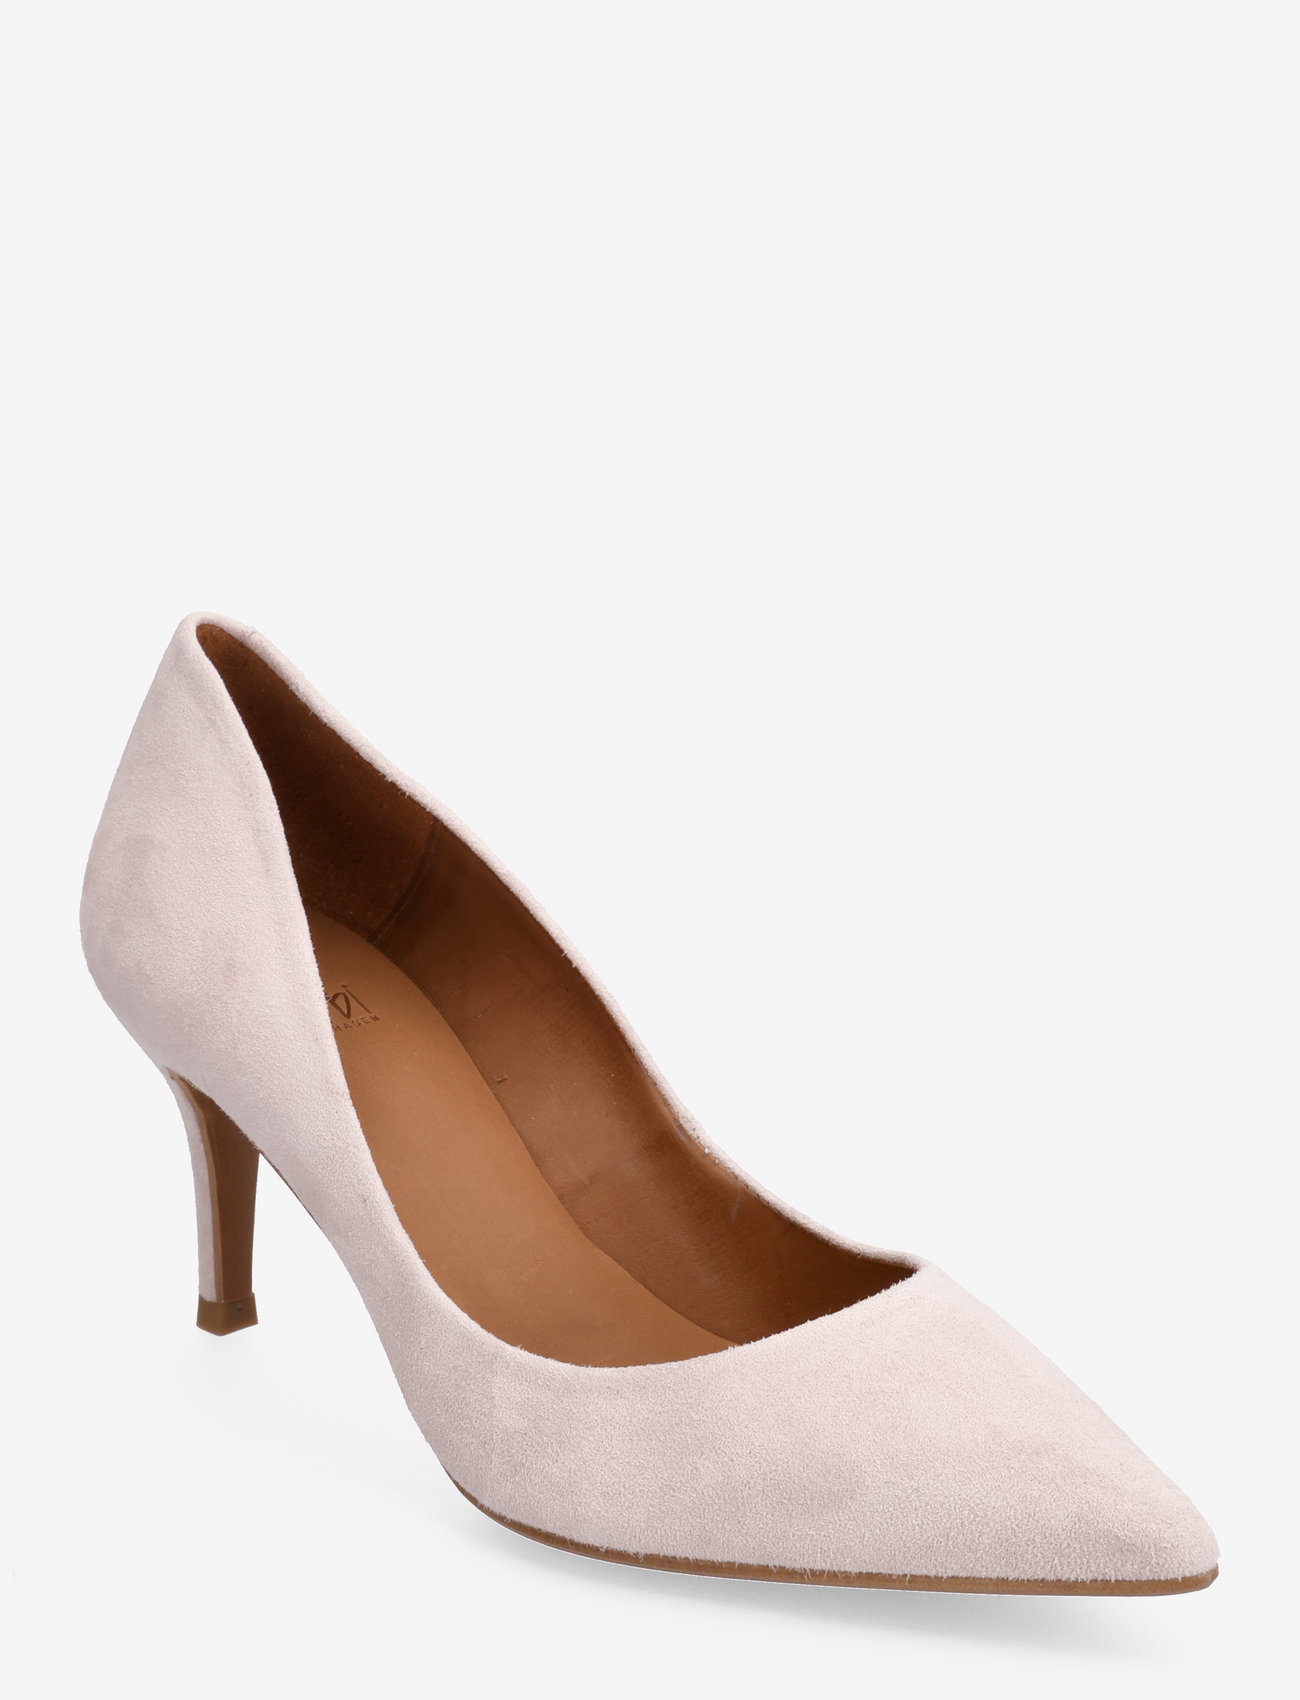 Billi Bi - Pumps - party wear at outlet prices - nude suede 599 - 0